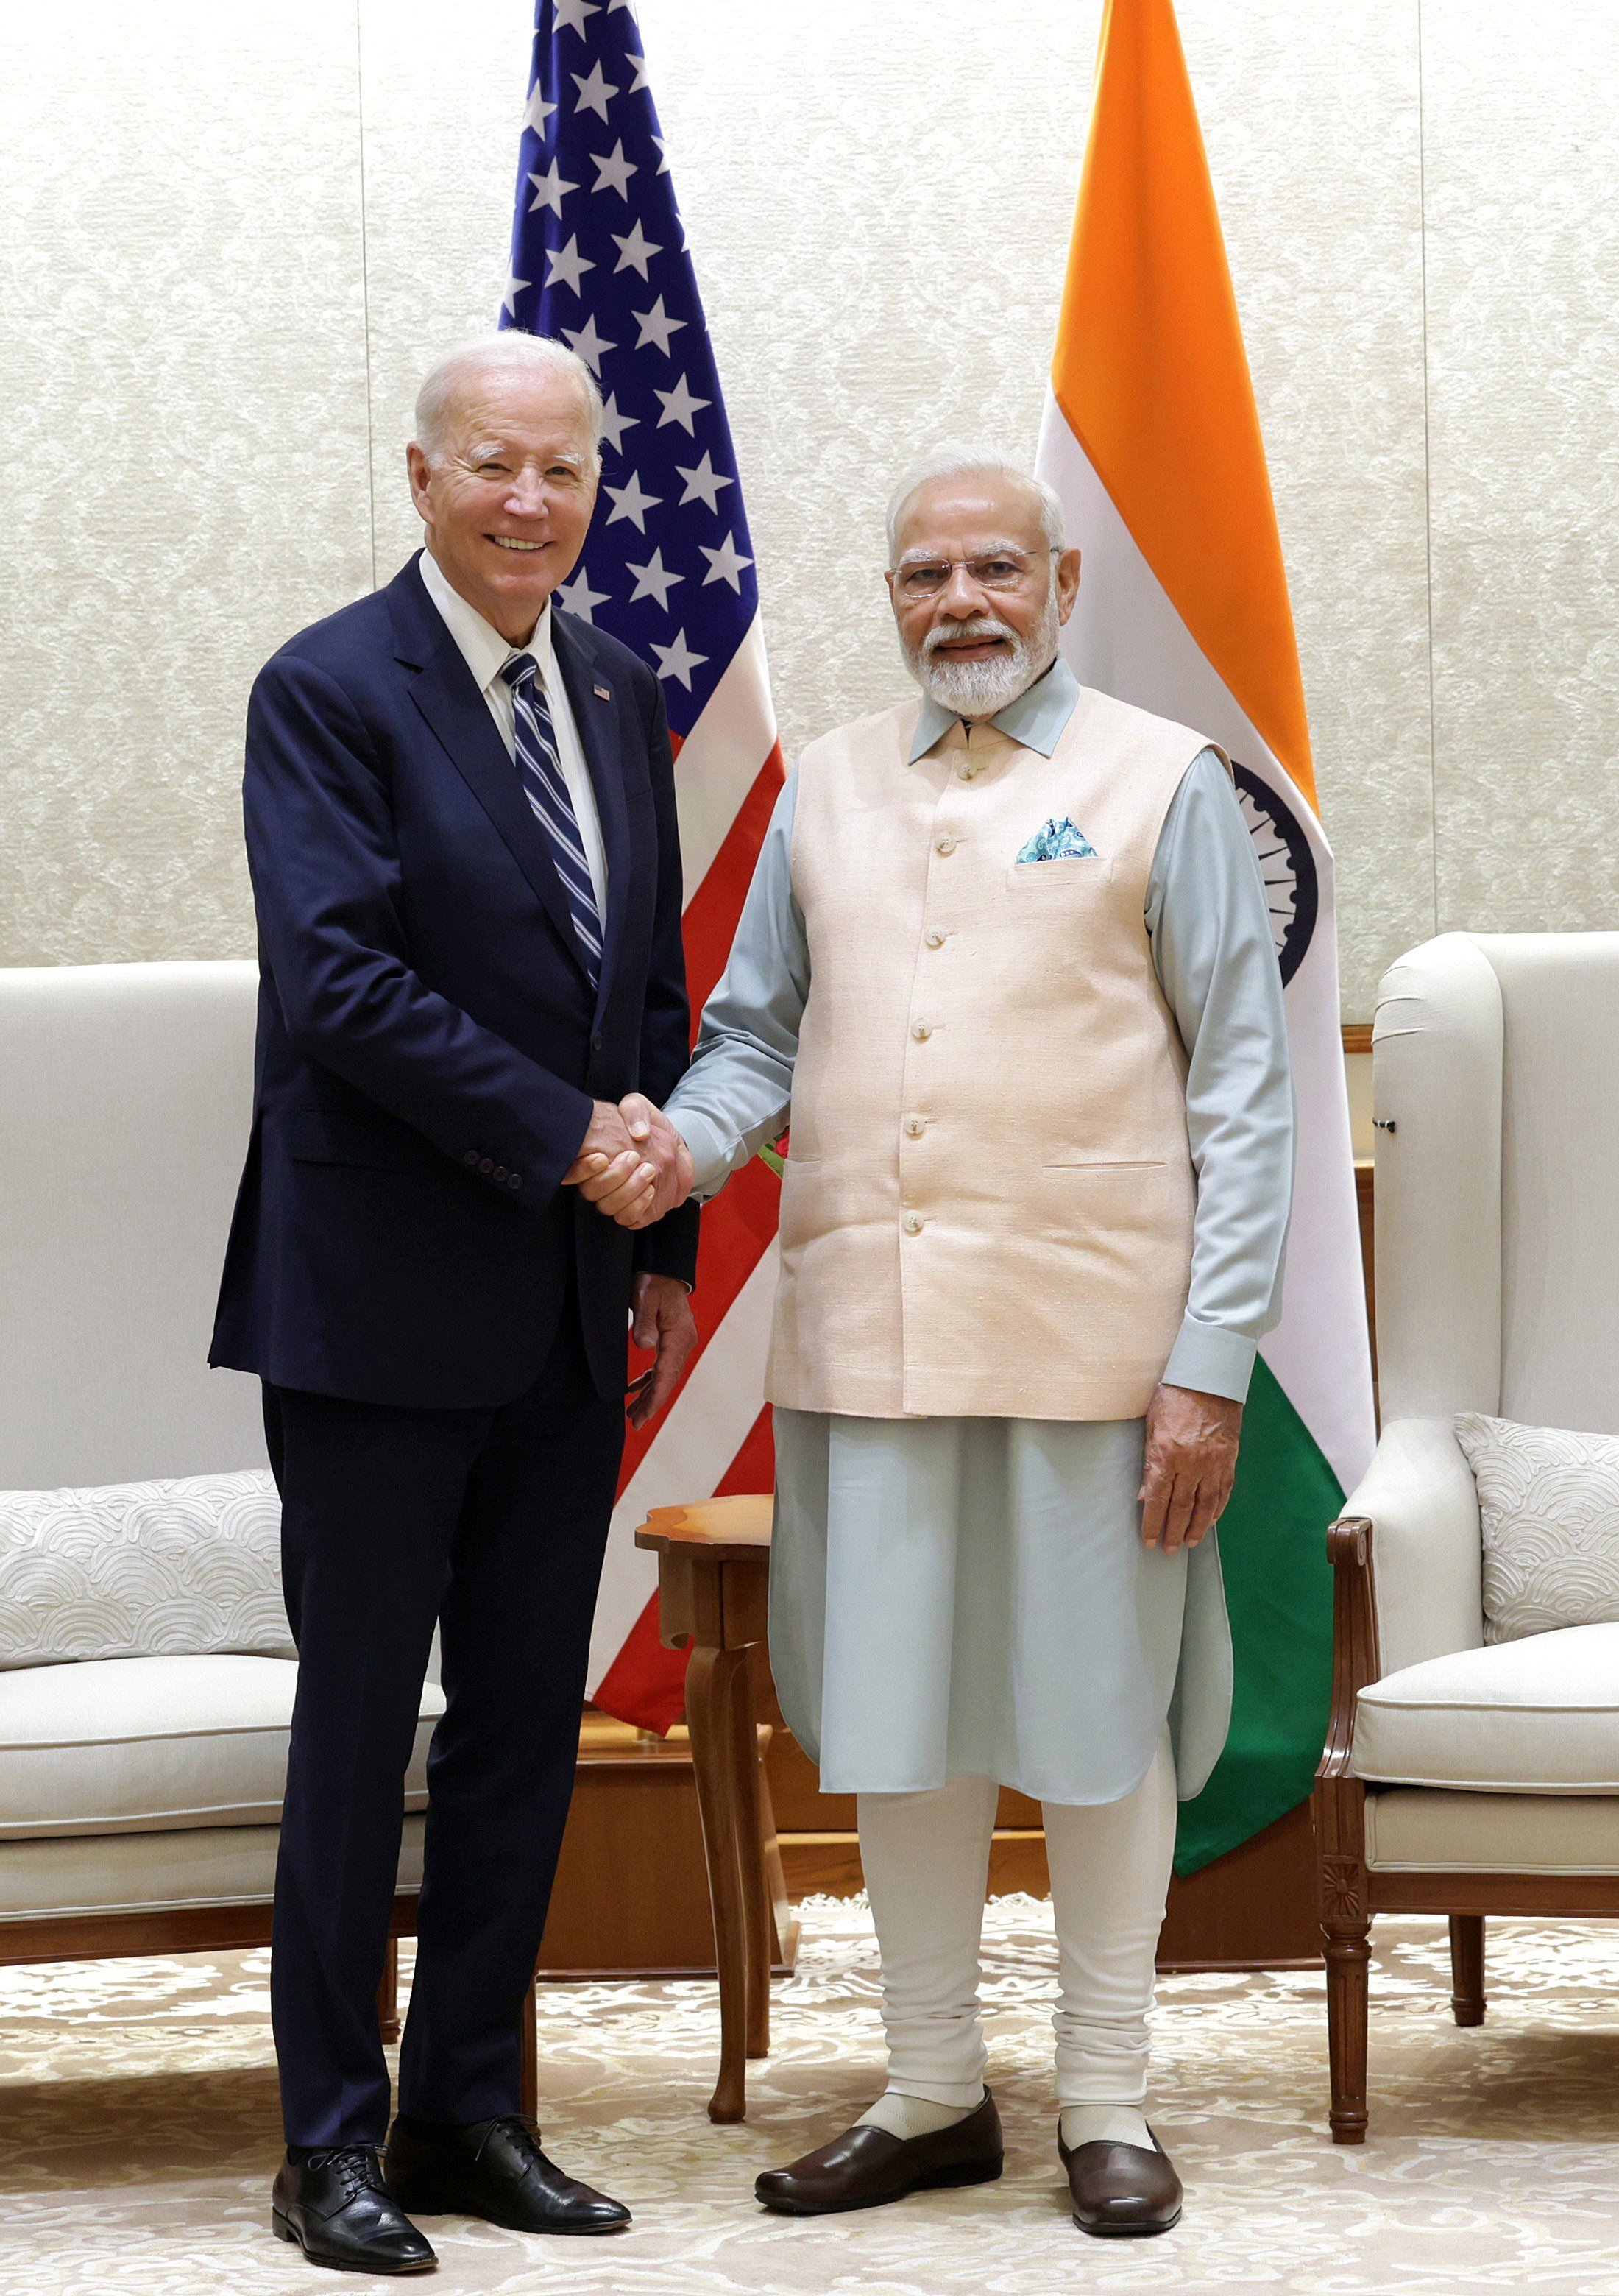 US President Joe Biden and Indian Prime Minister Narendra Modi in New Delhi on Friday, ahead of  the Group of 20 summit scheduled for the weekend. Photo: Indian Press Information Bureau via EPA-EFE